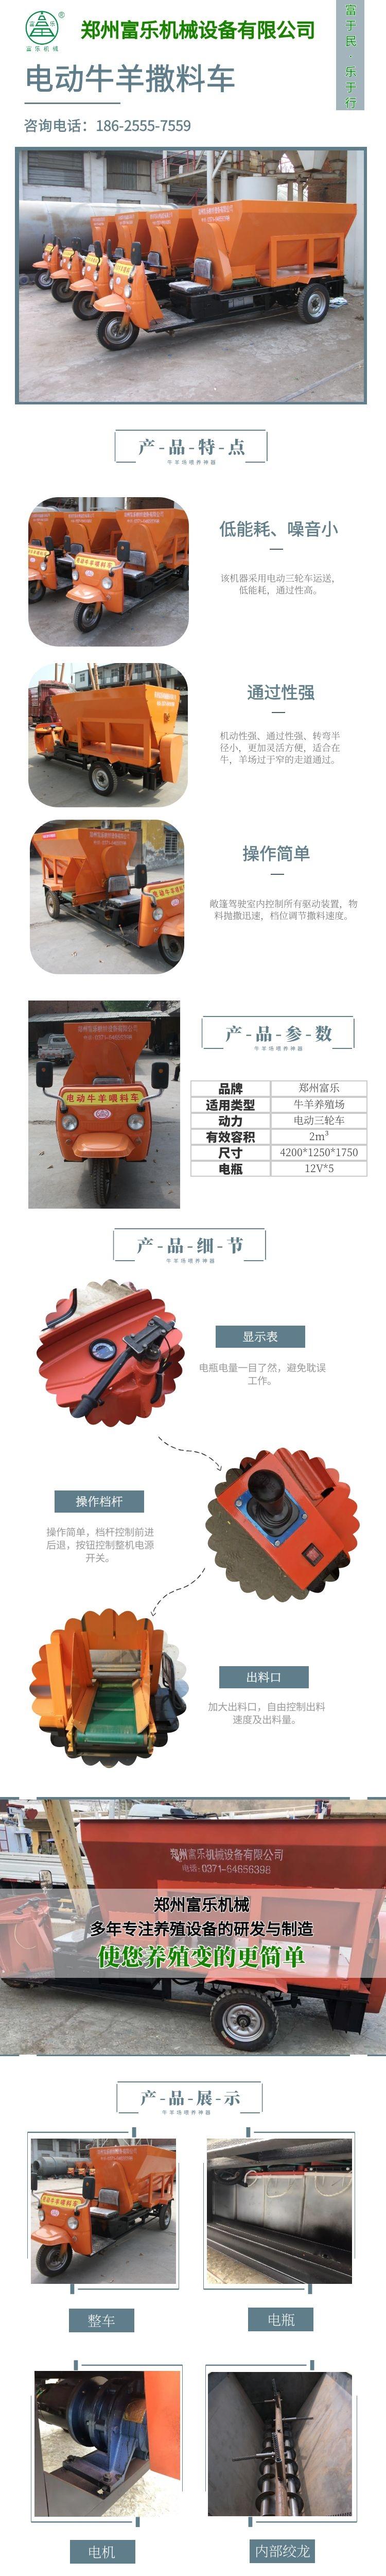 Electric spreader truck, small cattle and sheep feeder truck, electric battery, mule and horse forage feeder truck